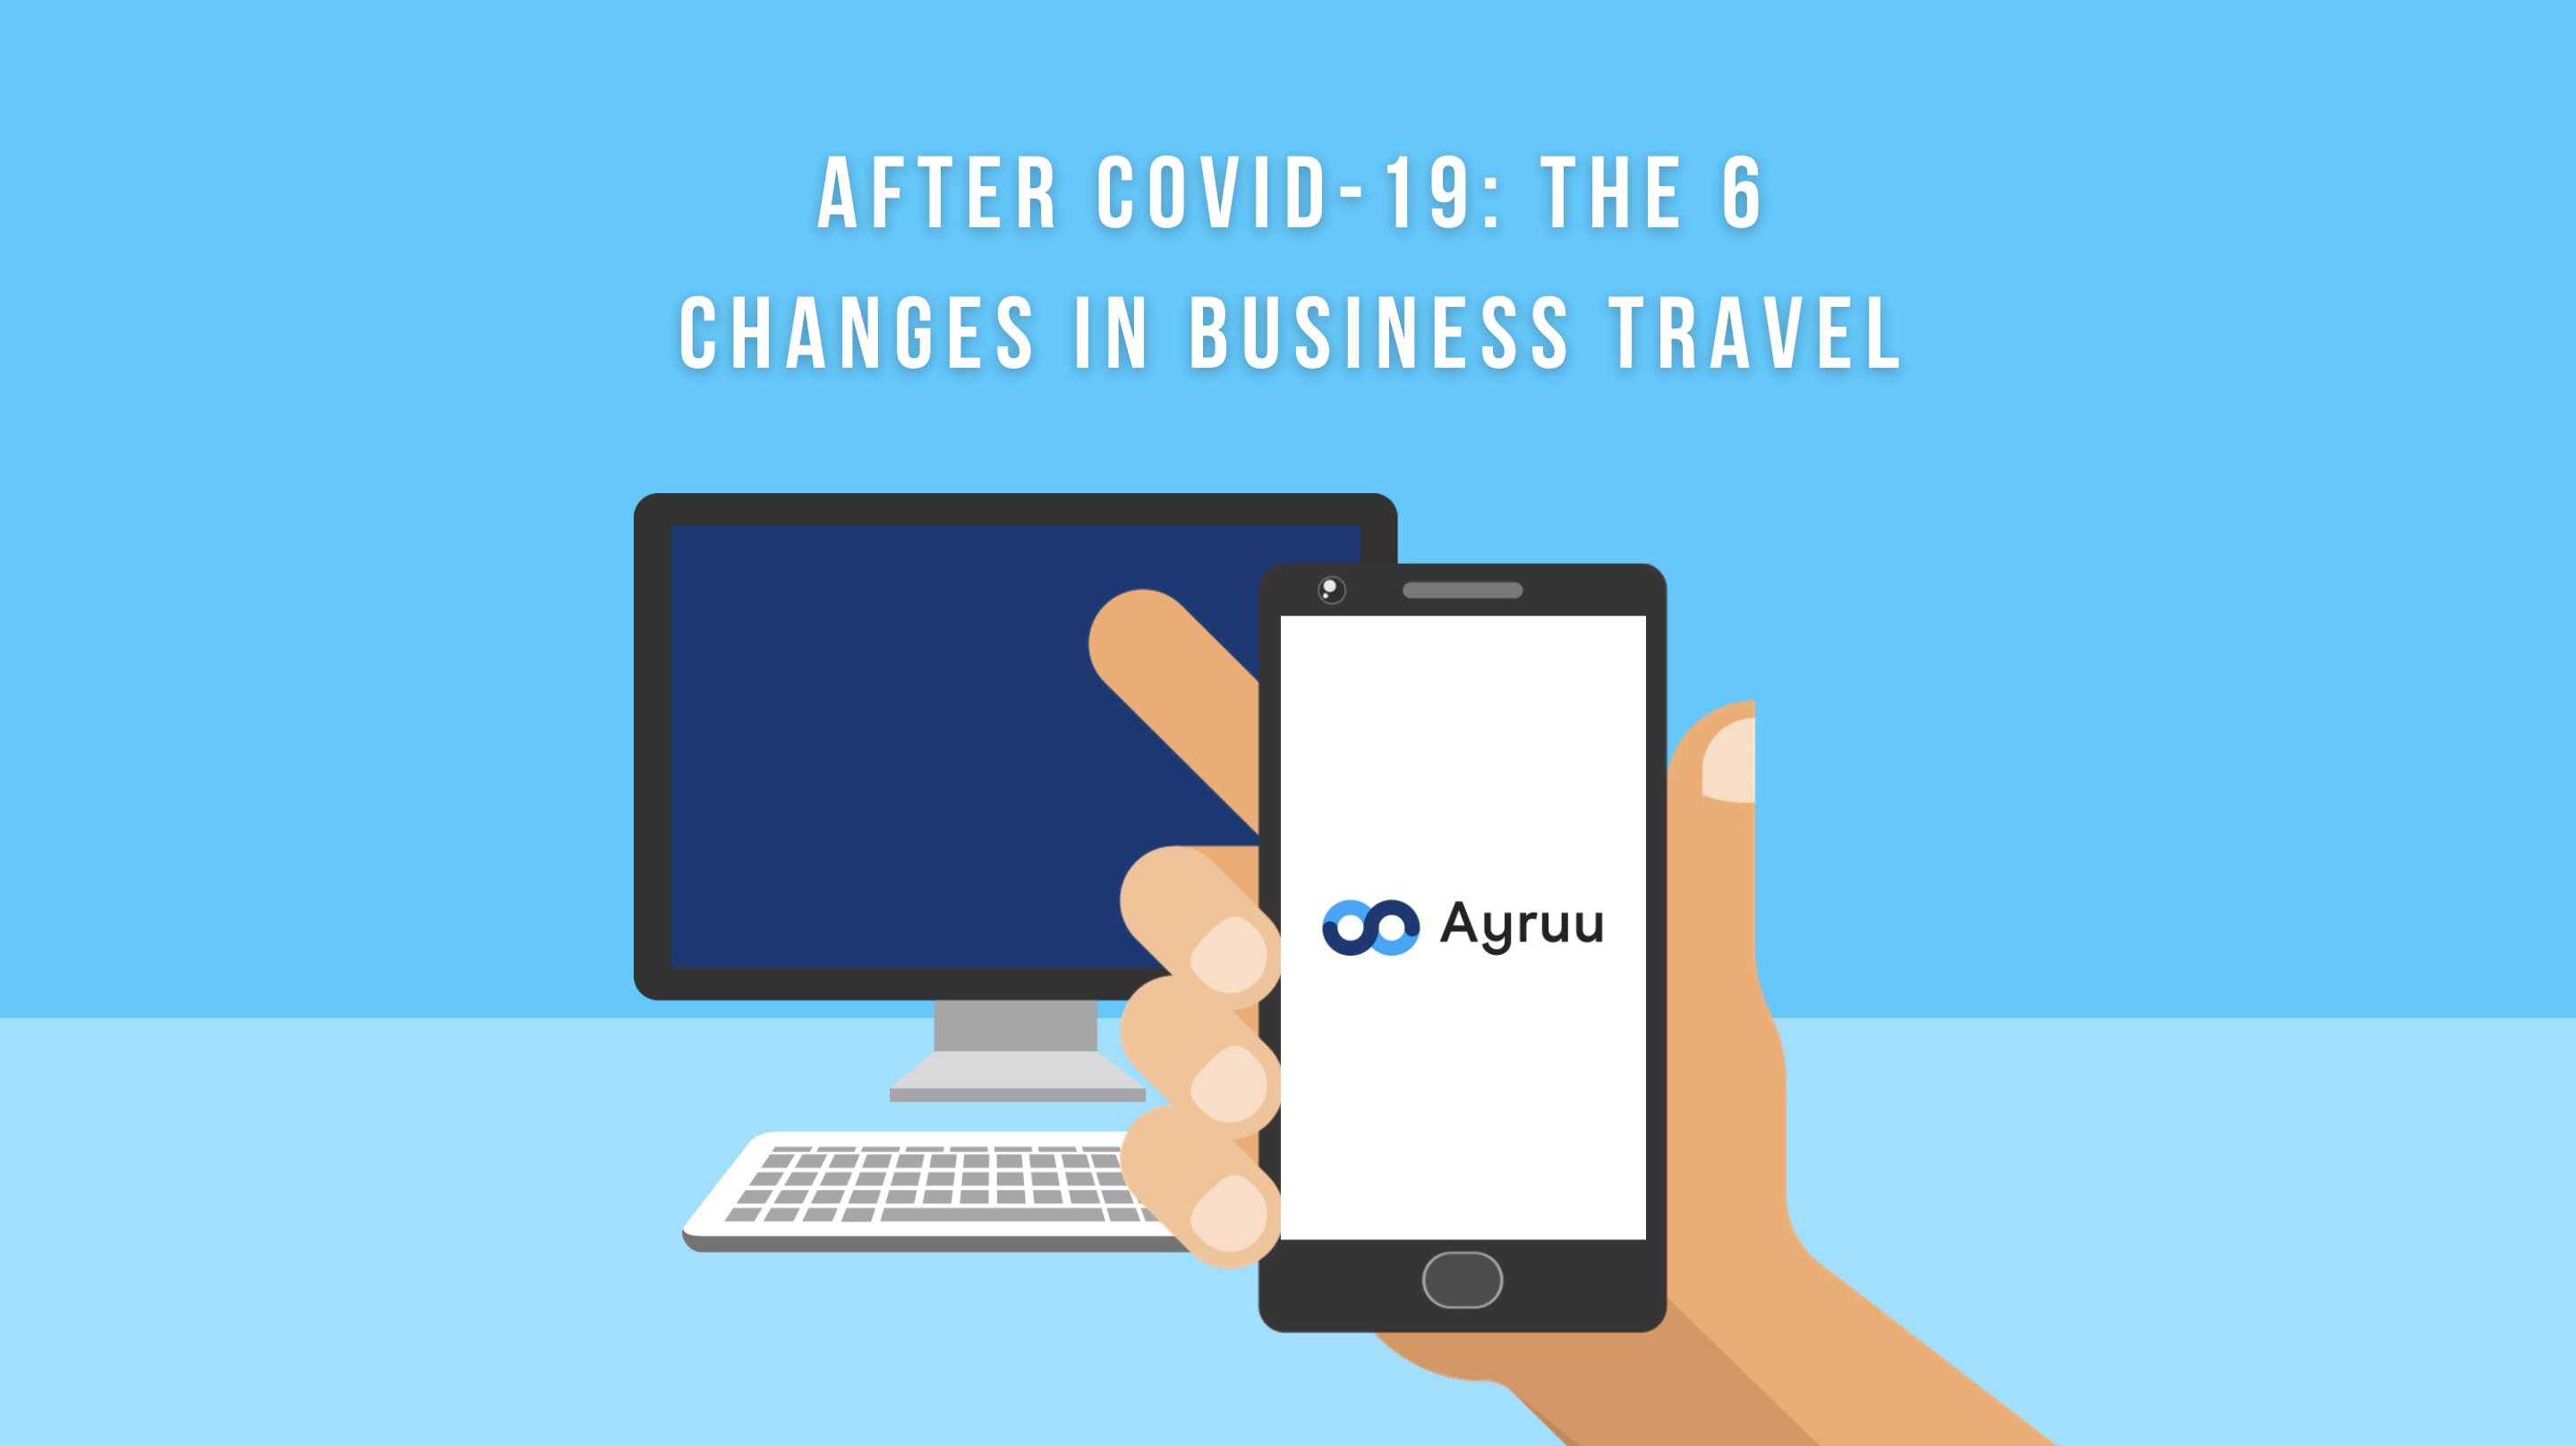 After Covid-19: The 6 changes in business travel